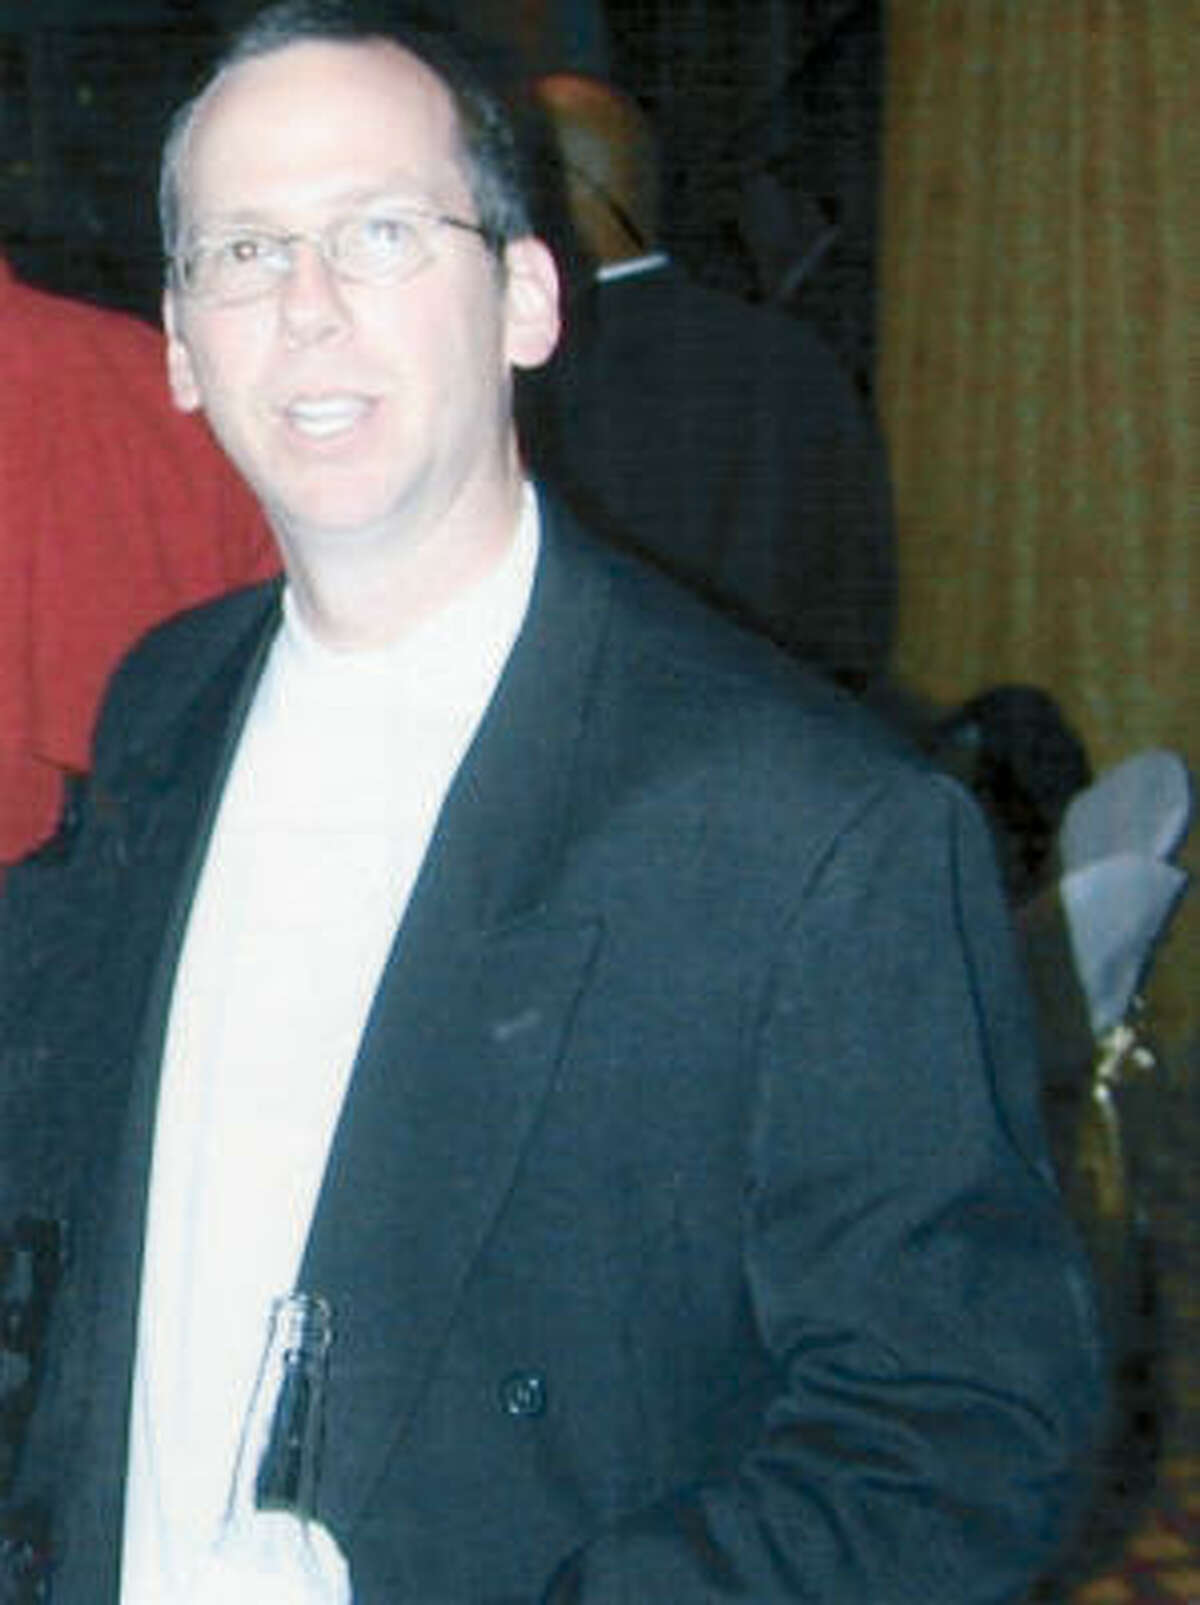 Larry Swonke hit his high of 197 pounds in December 2004.